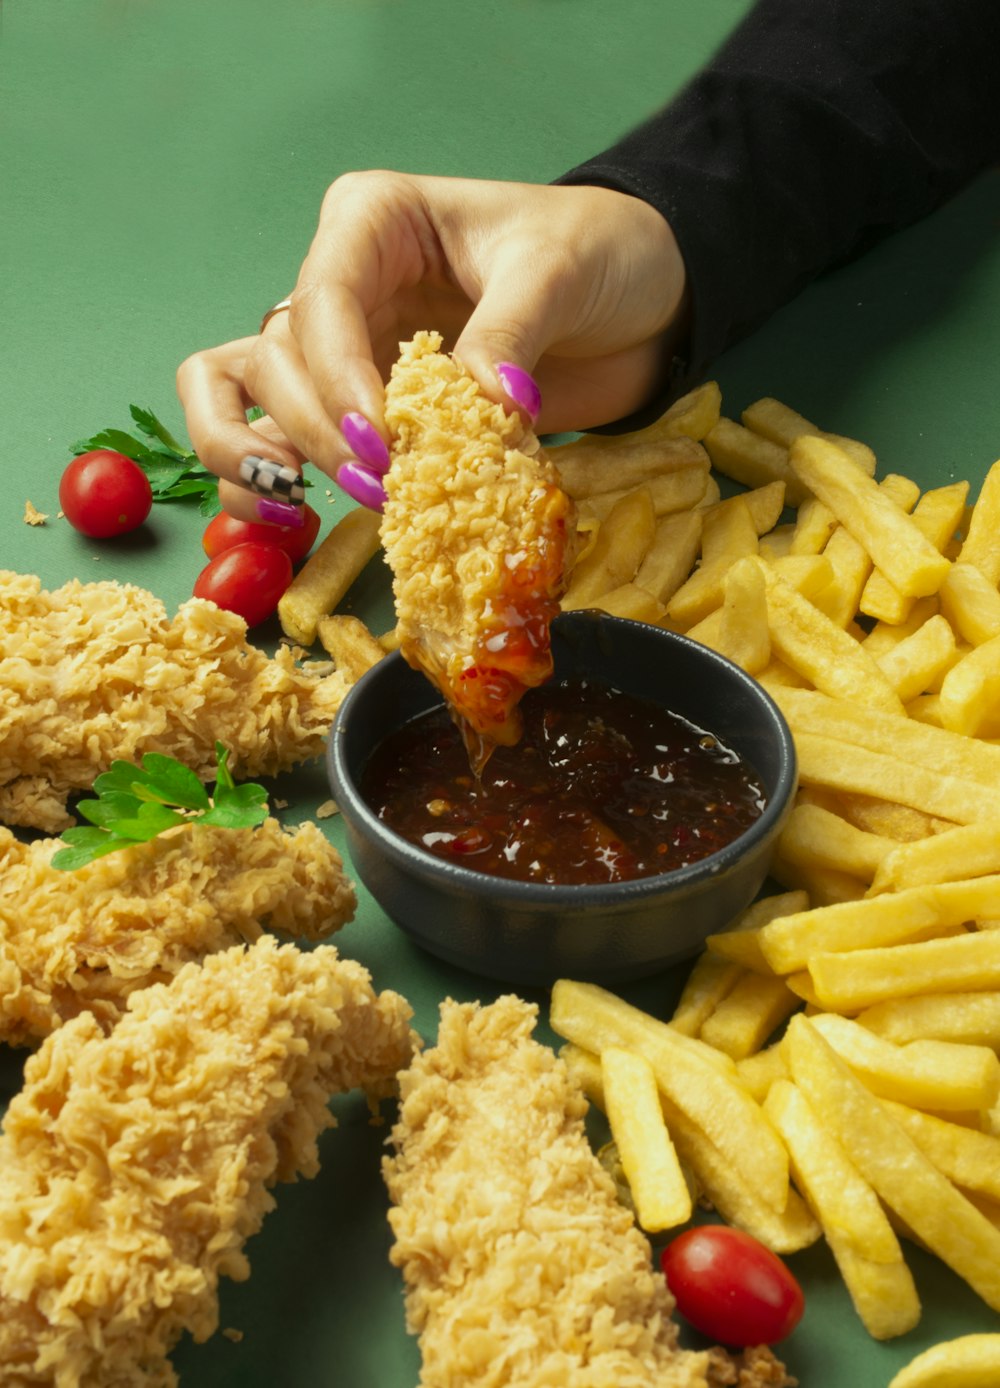 a person dipping a piece of chicken into a bowl of fries